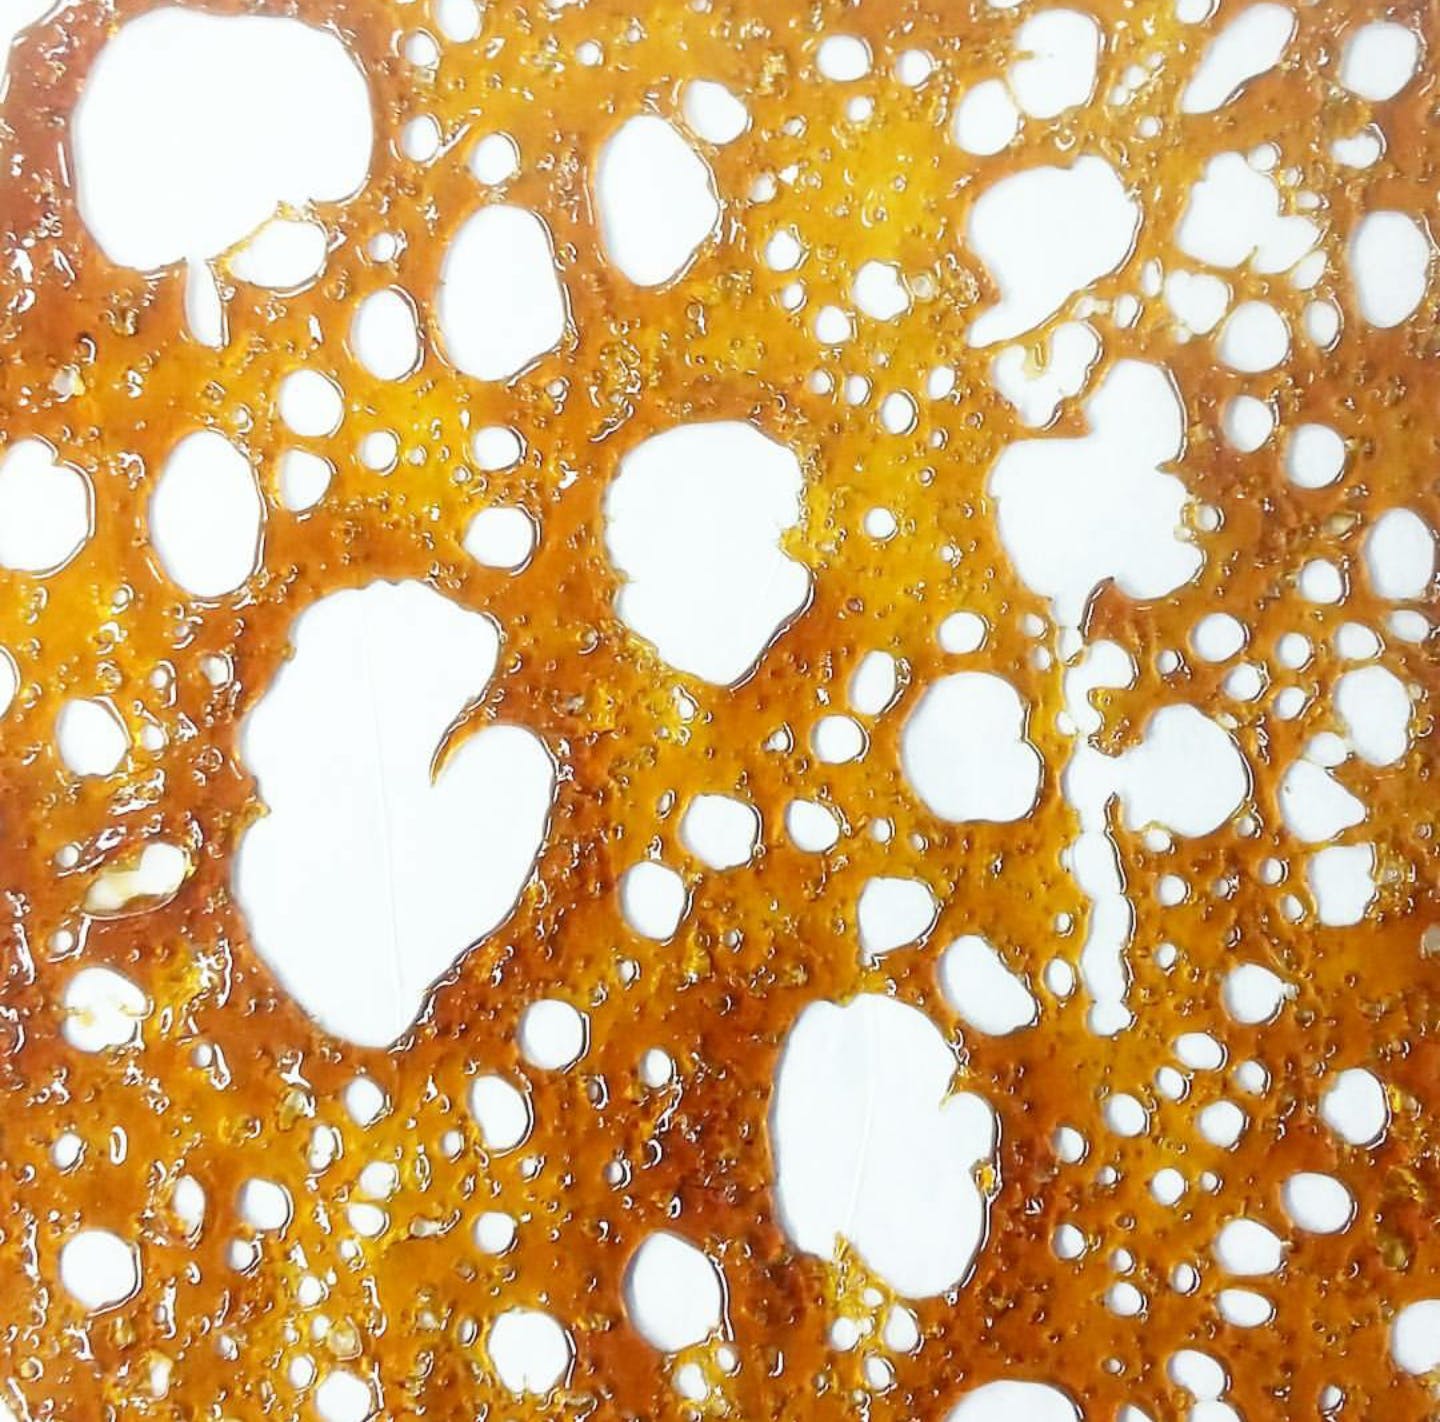 concentrate-west-edison-shatter-assorted-strains